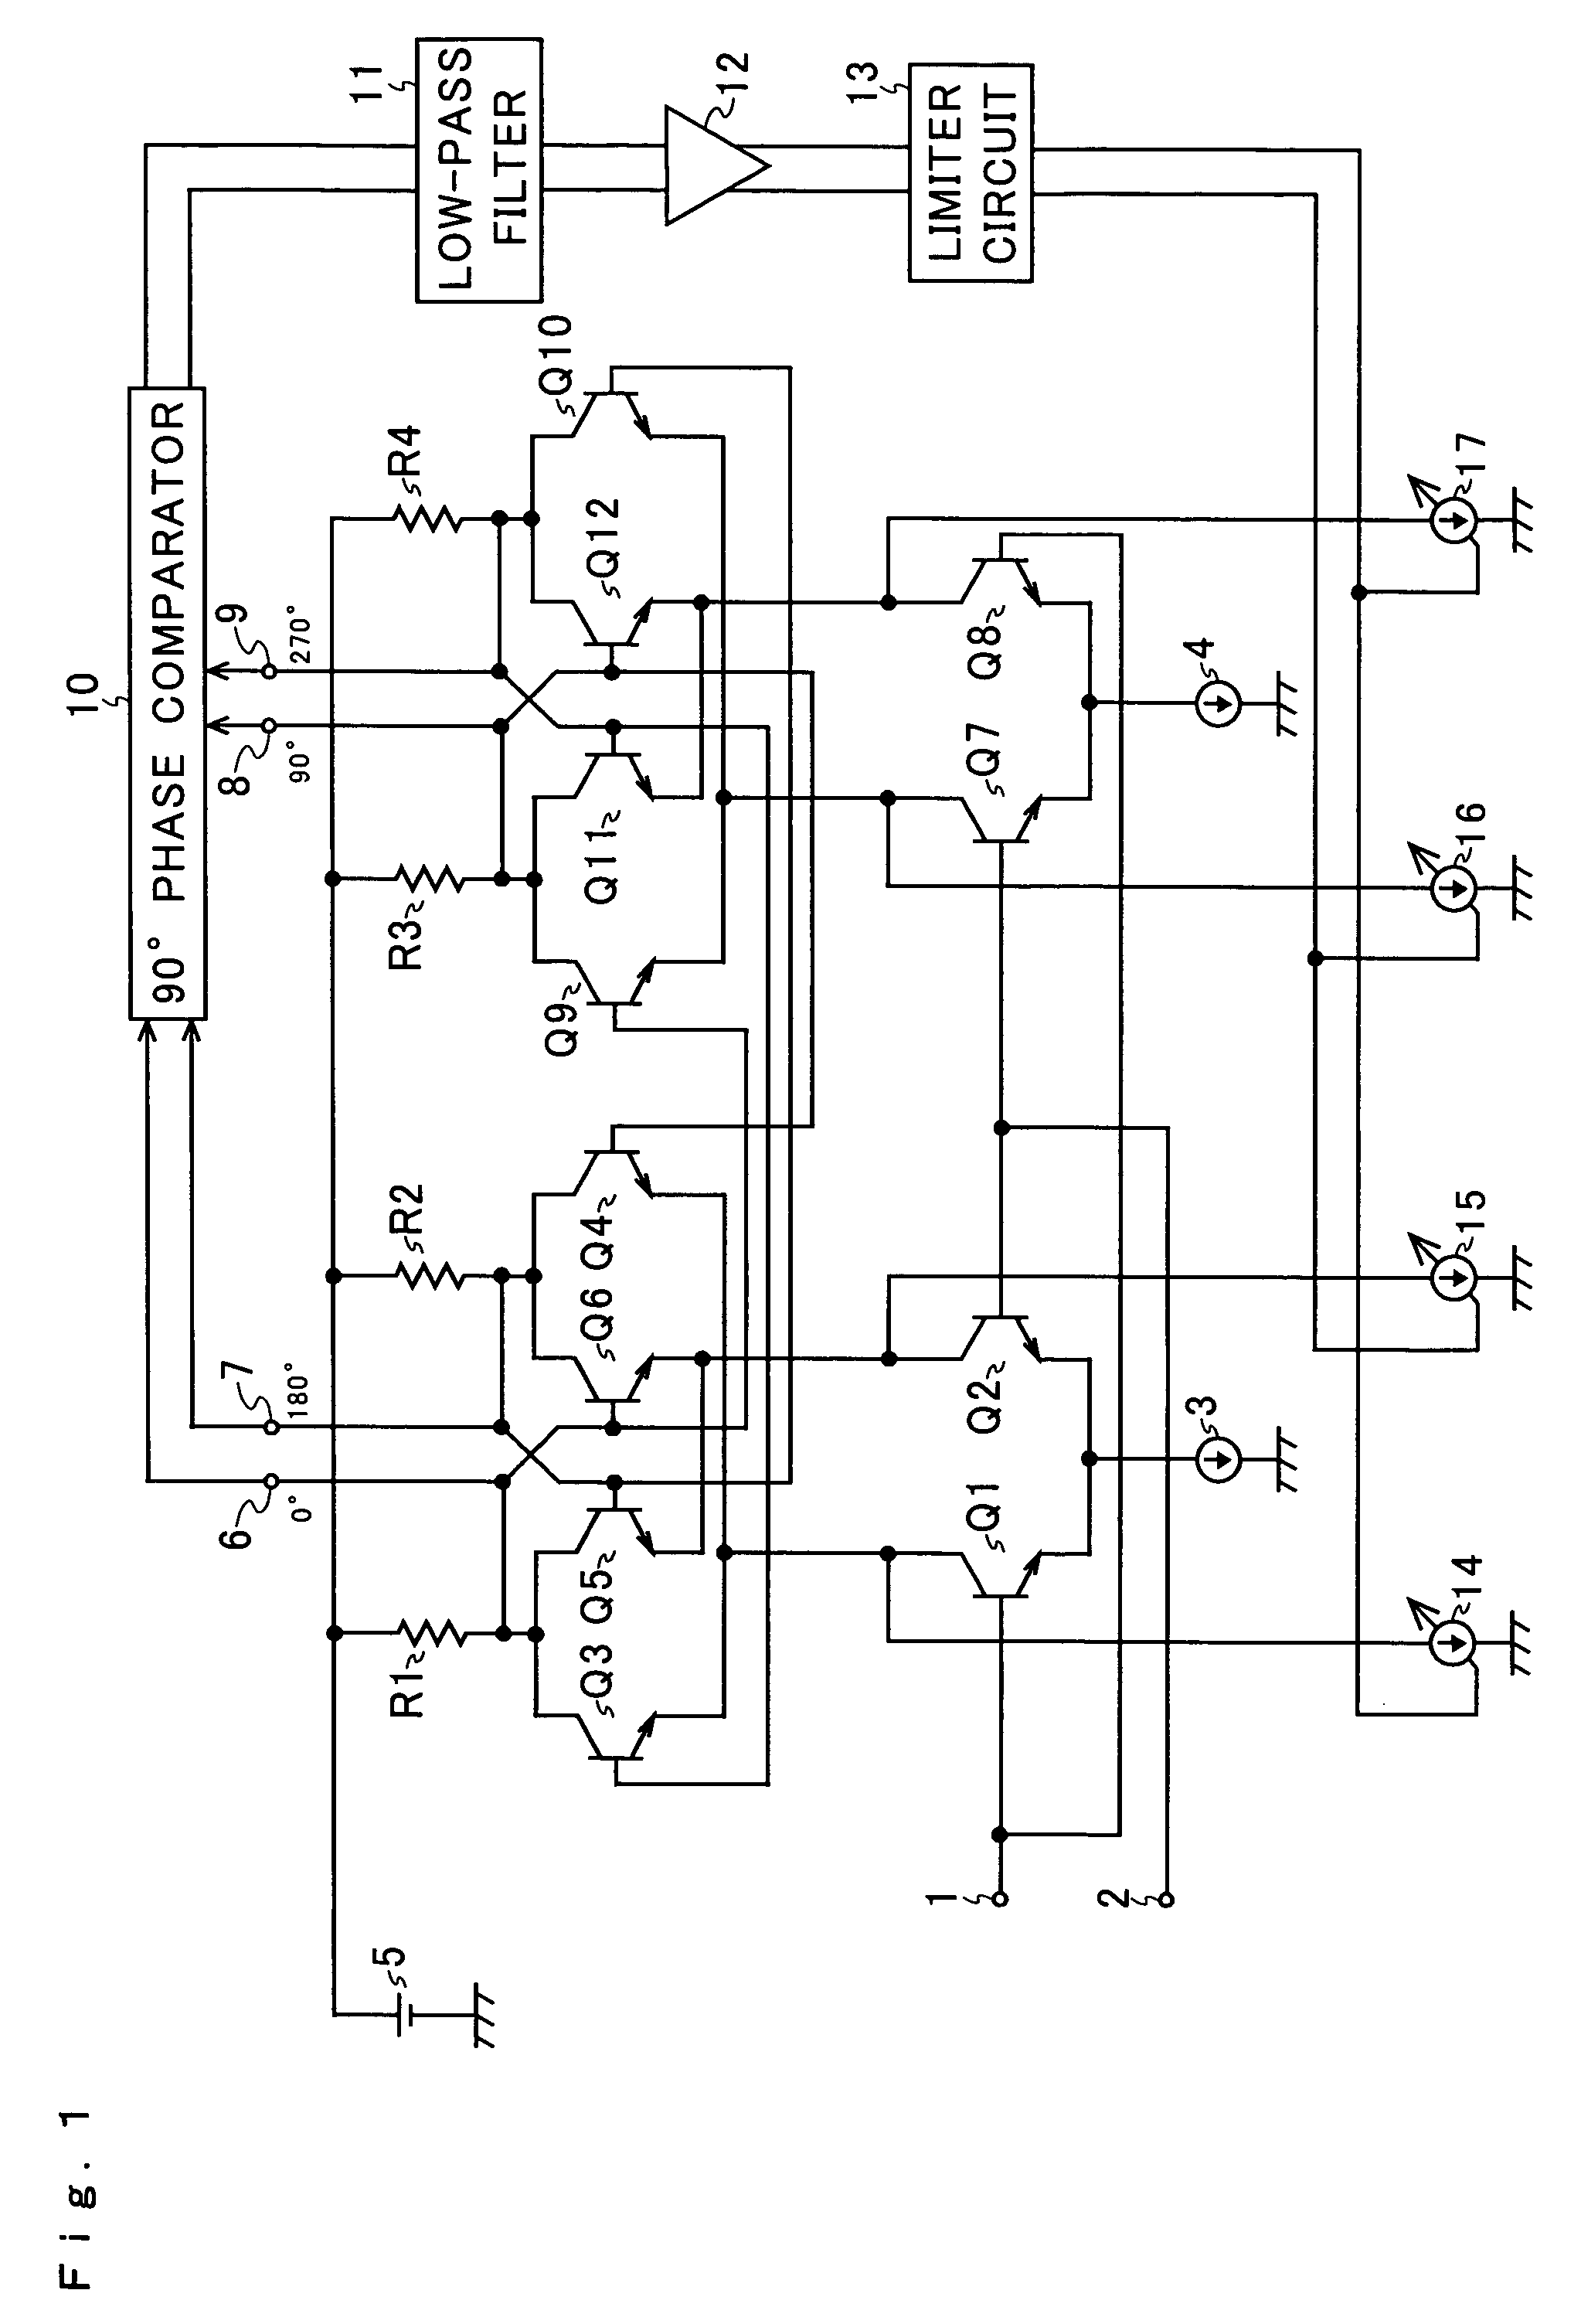 90-degree phase shifter